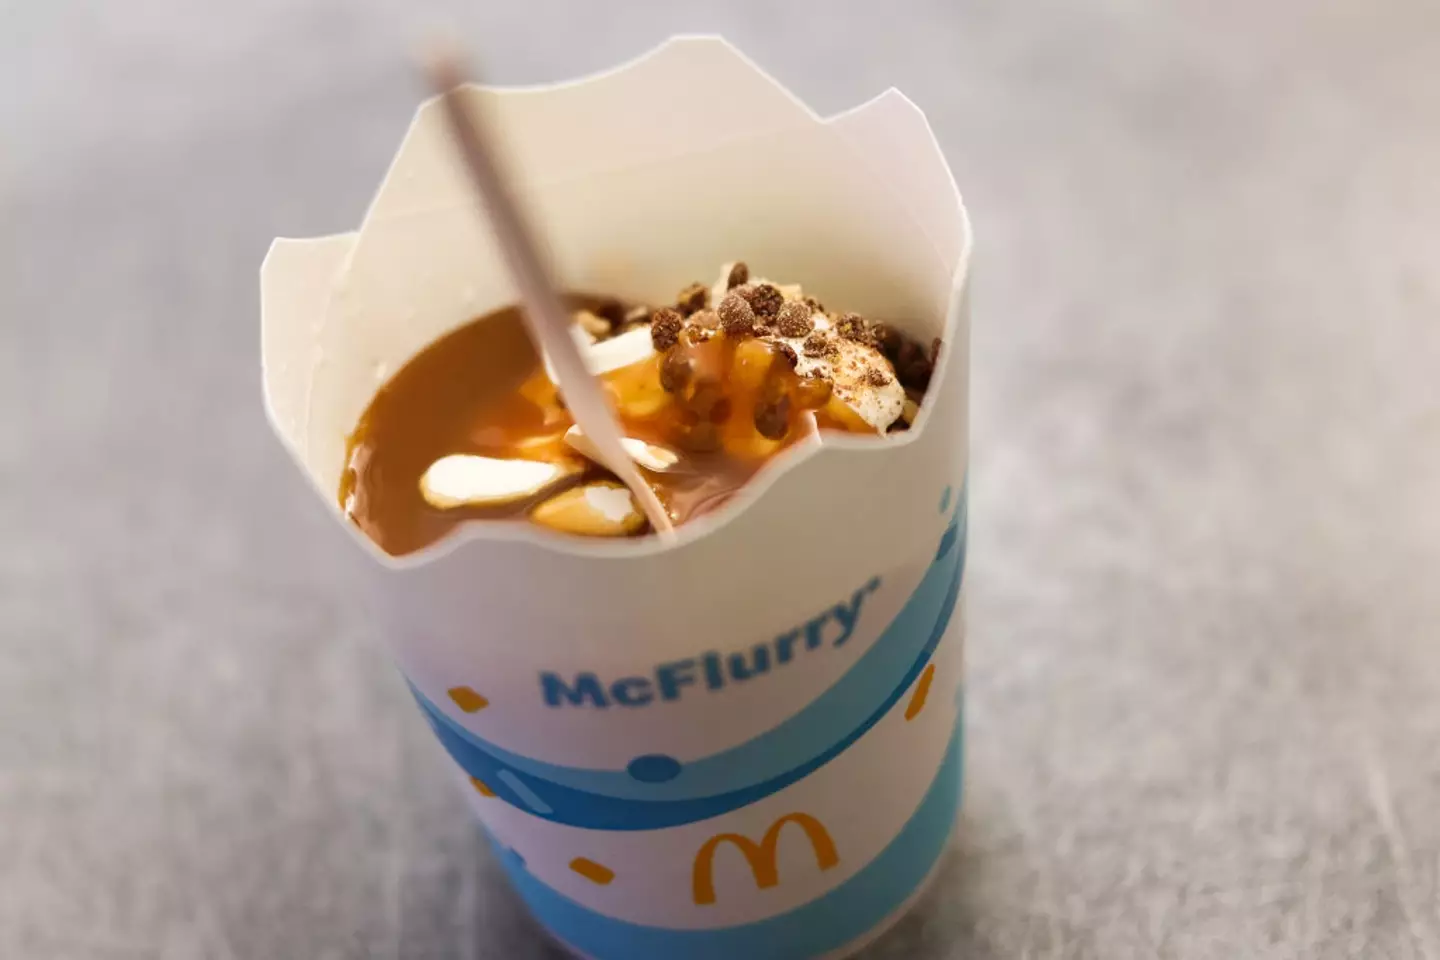 Who doesn't love a McDonald's McFlurry?